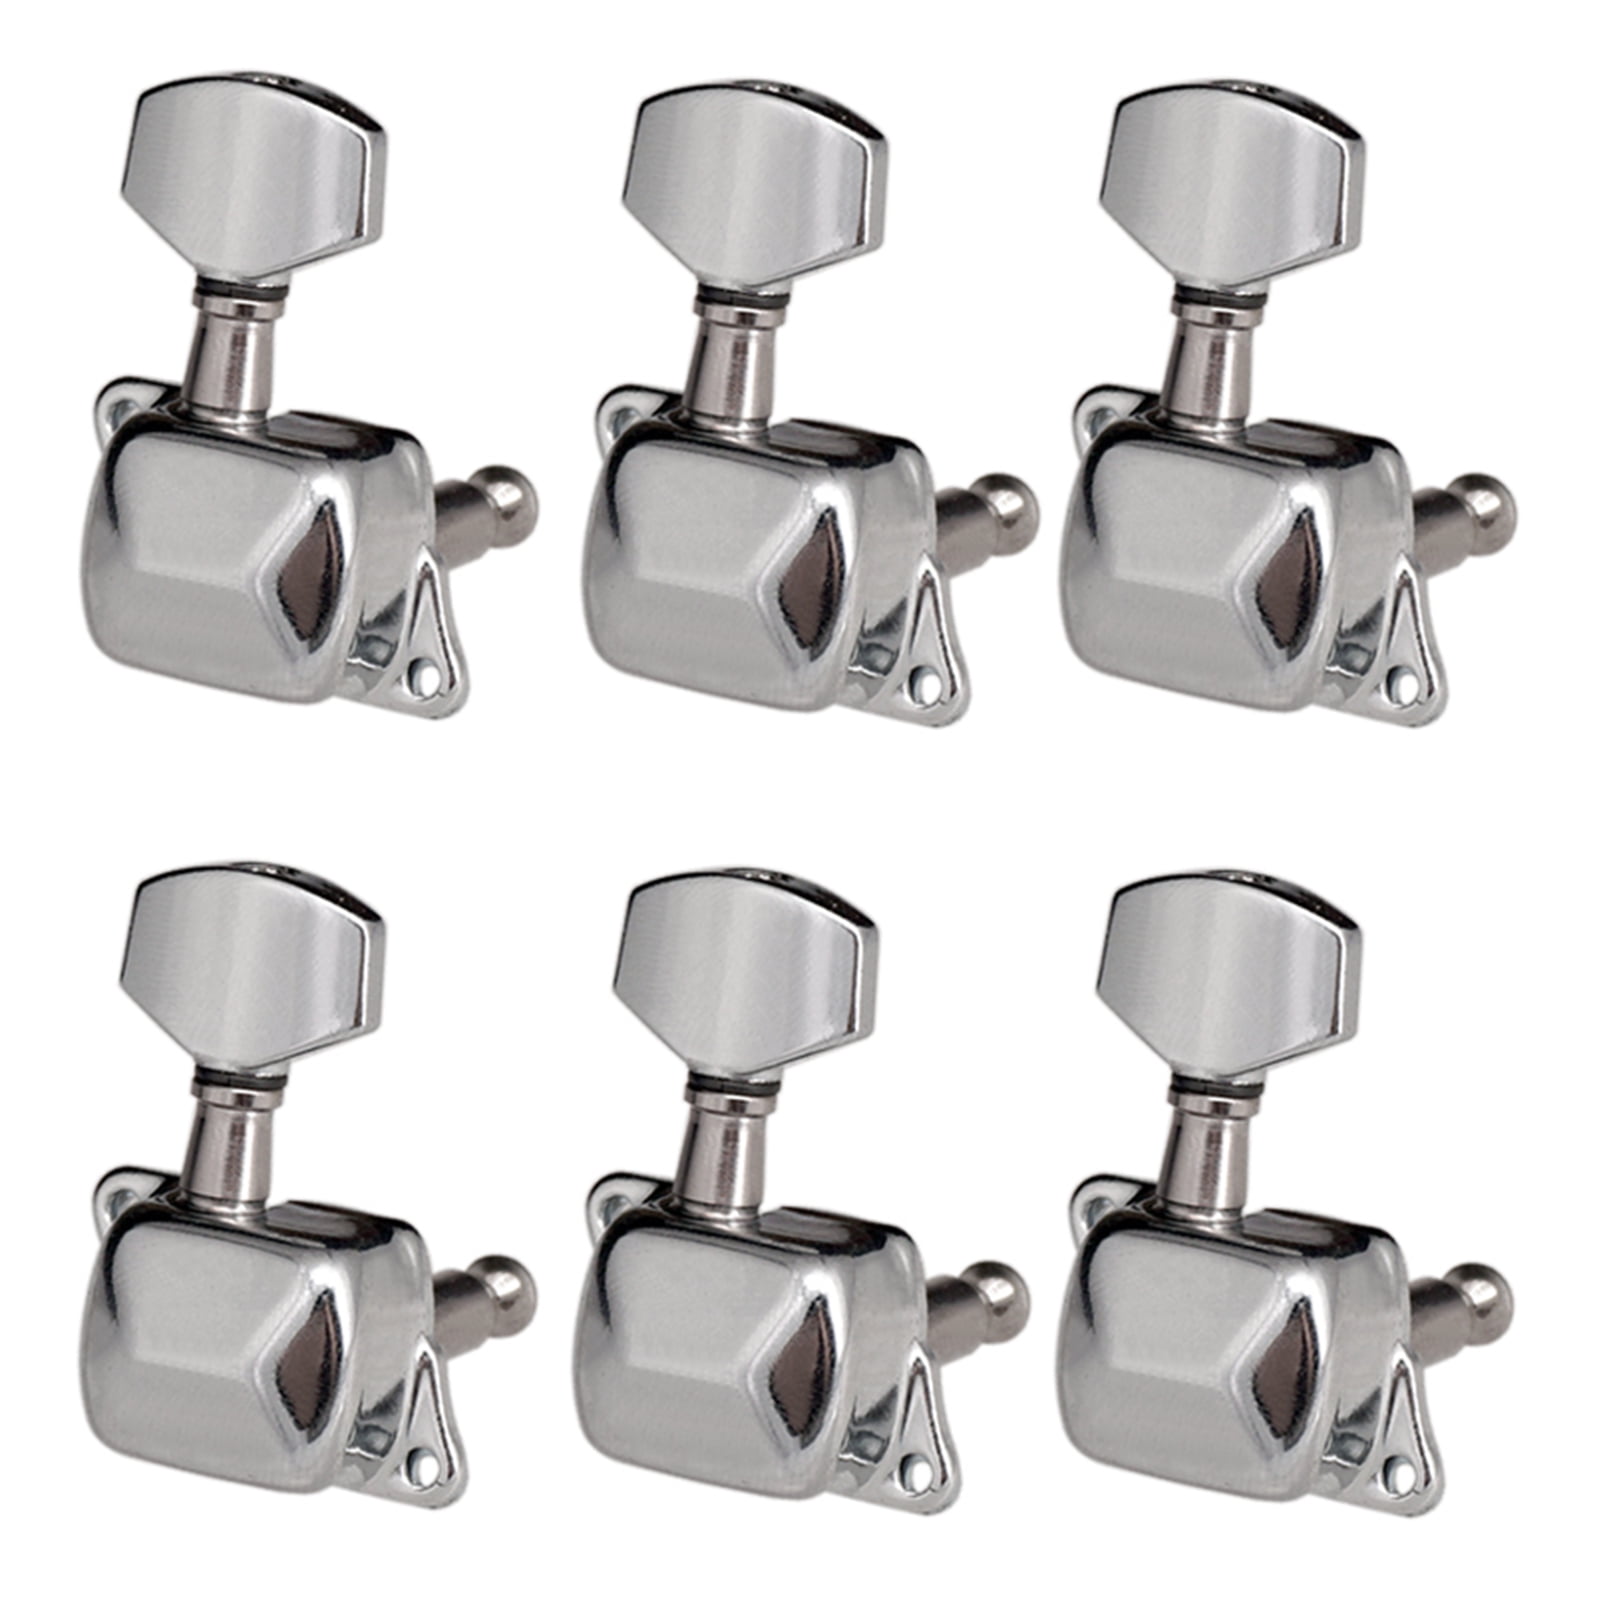 ammoon 3R 3L Chrome Electric Acoustic Guitar String Tuning Pegs Tuners Machine Heads 